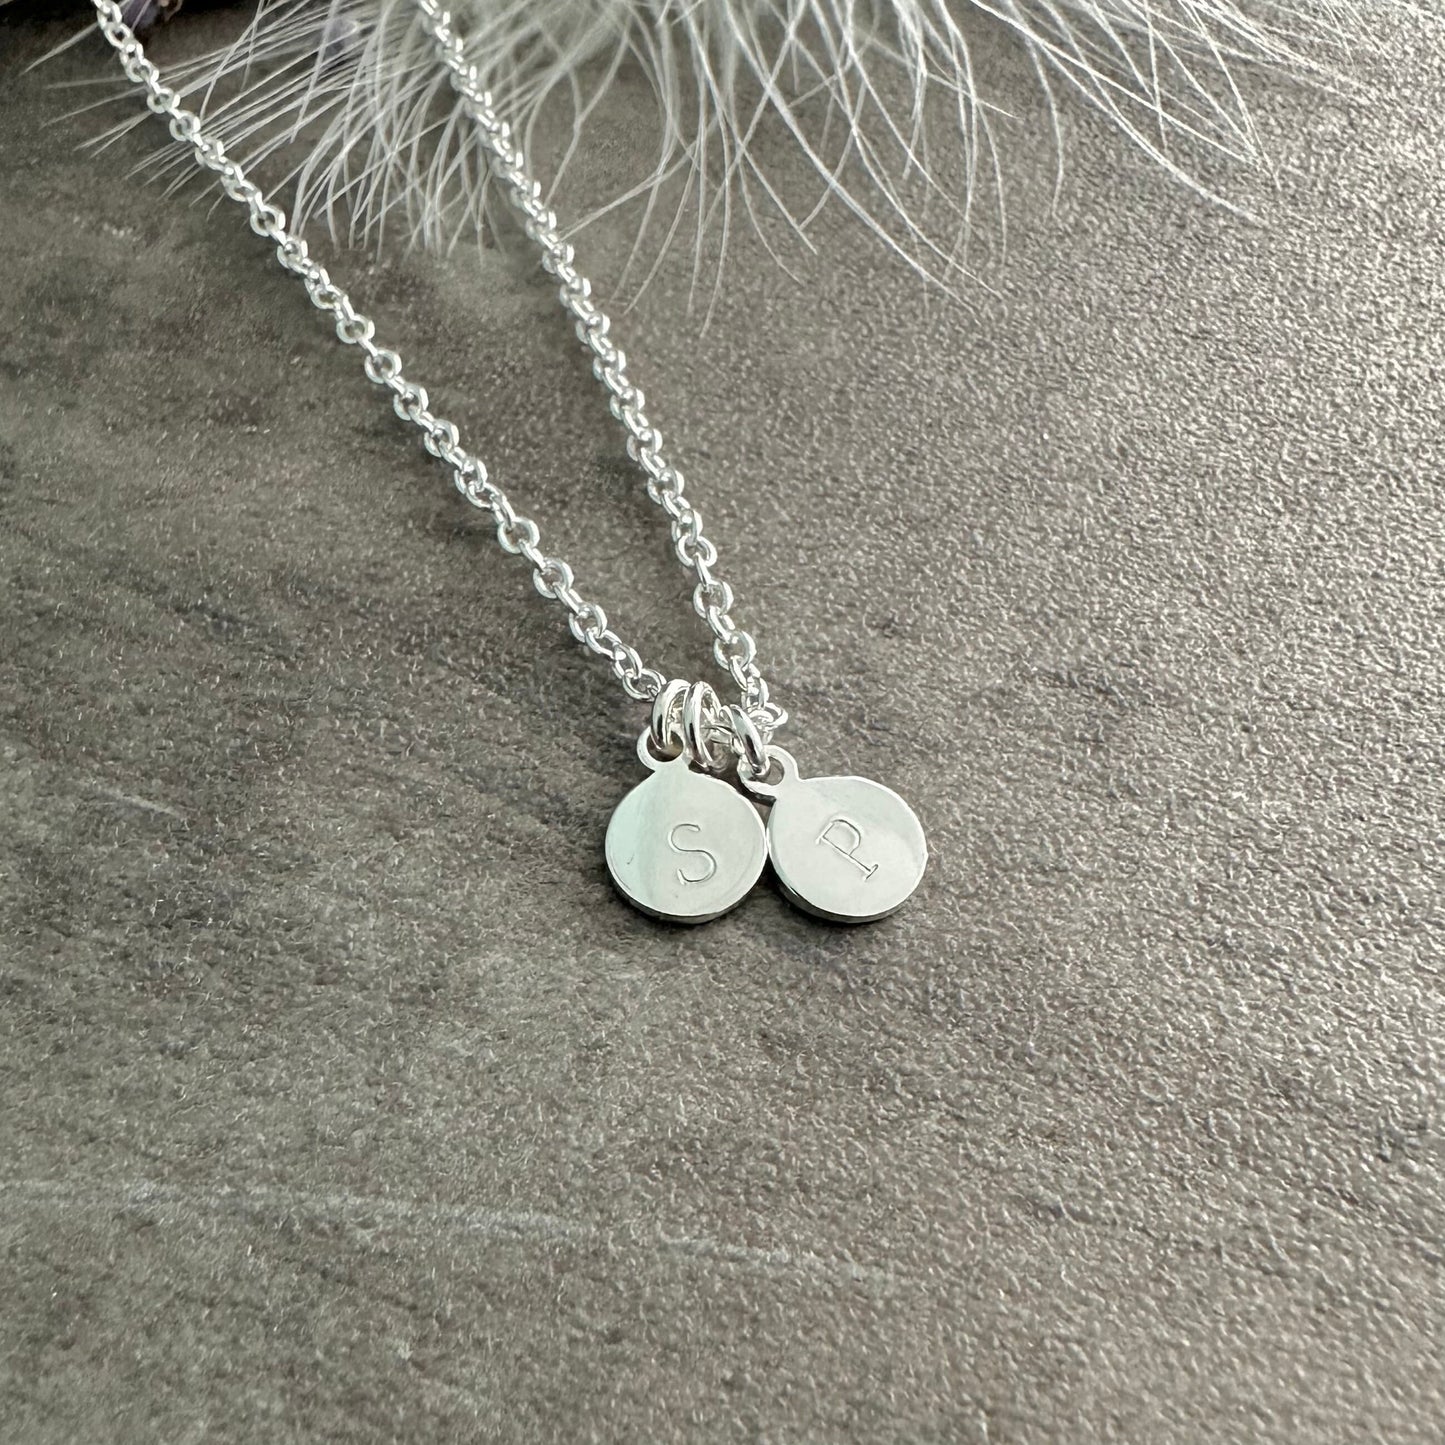 Family Initial Disc Necklace, Children or His Hers Initials Necklace